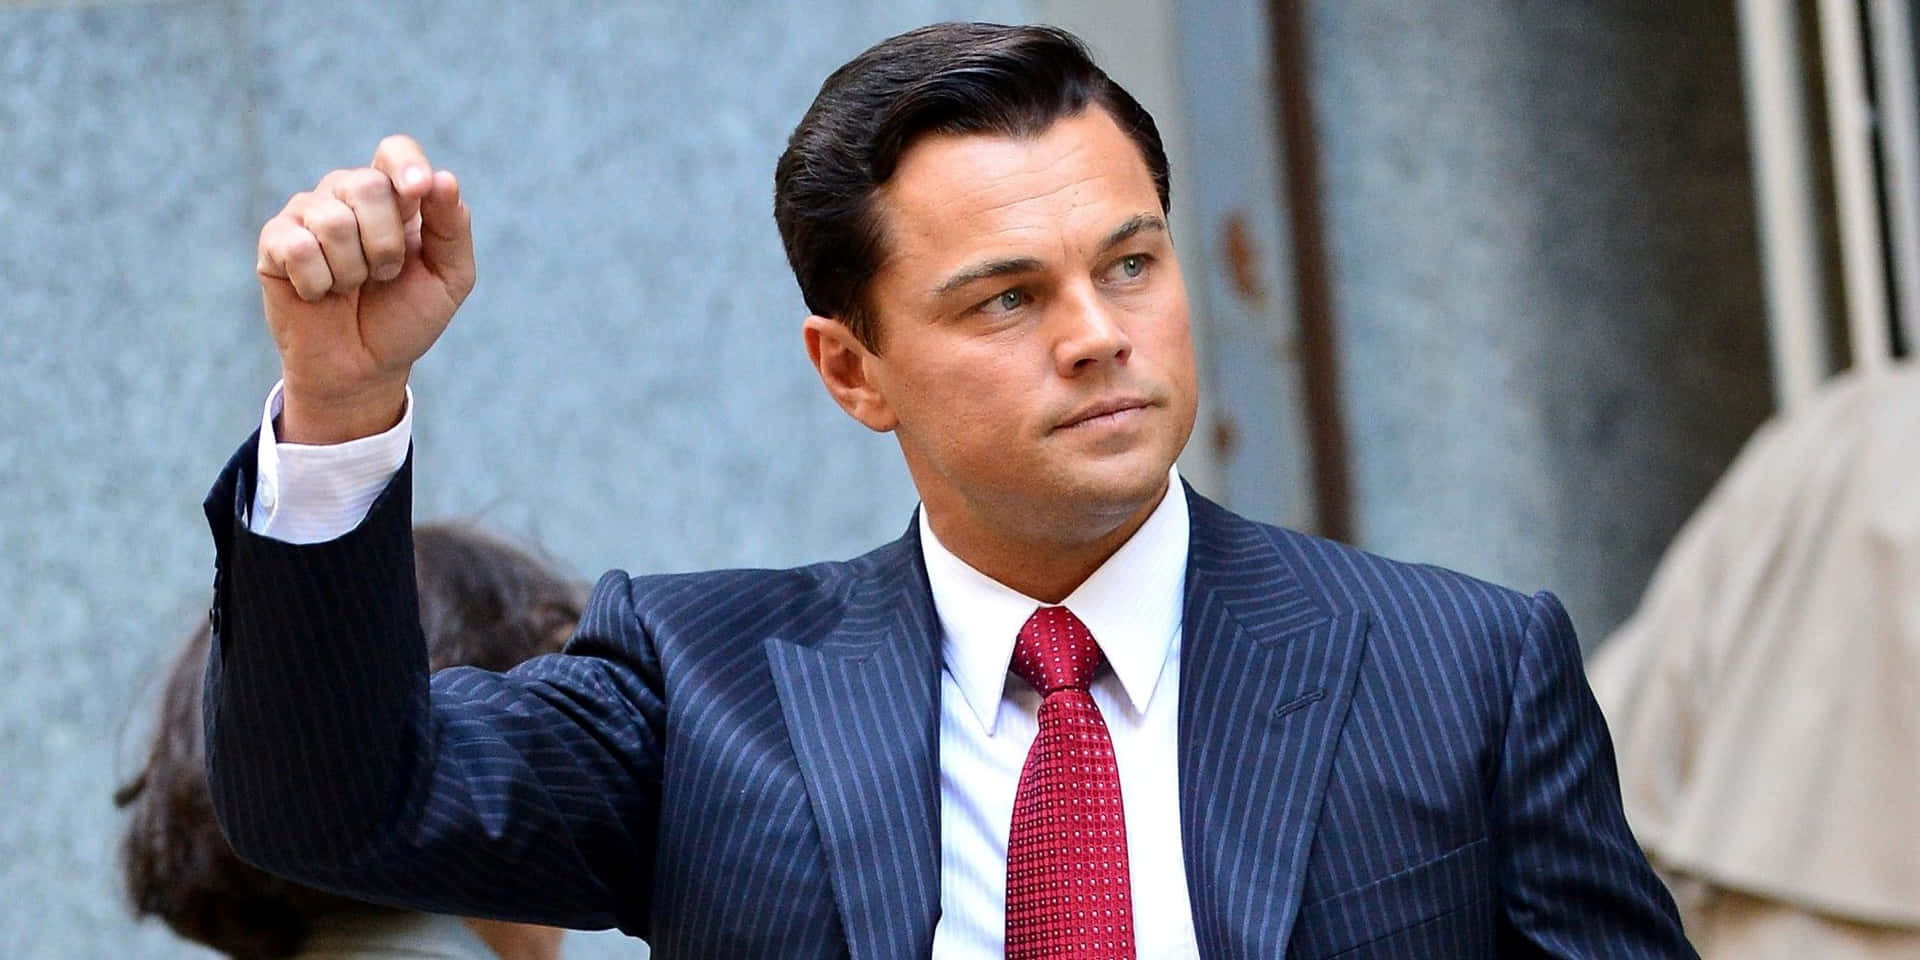 Jordan Belfort, The Notorious Wall Street Broker And The Subject Of The Wolf Of Wall Street